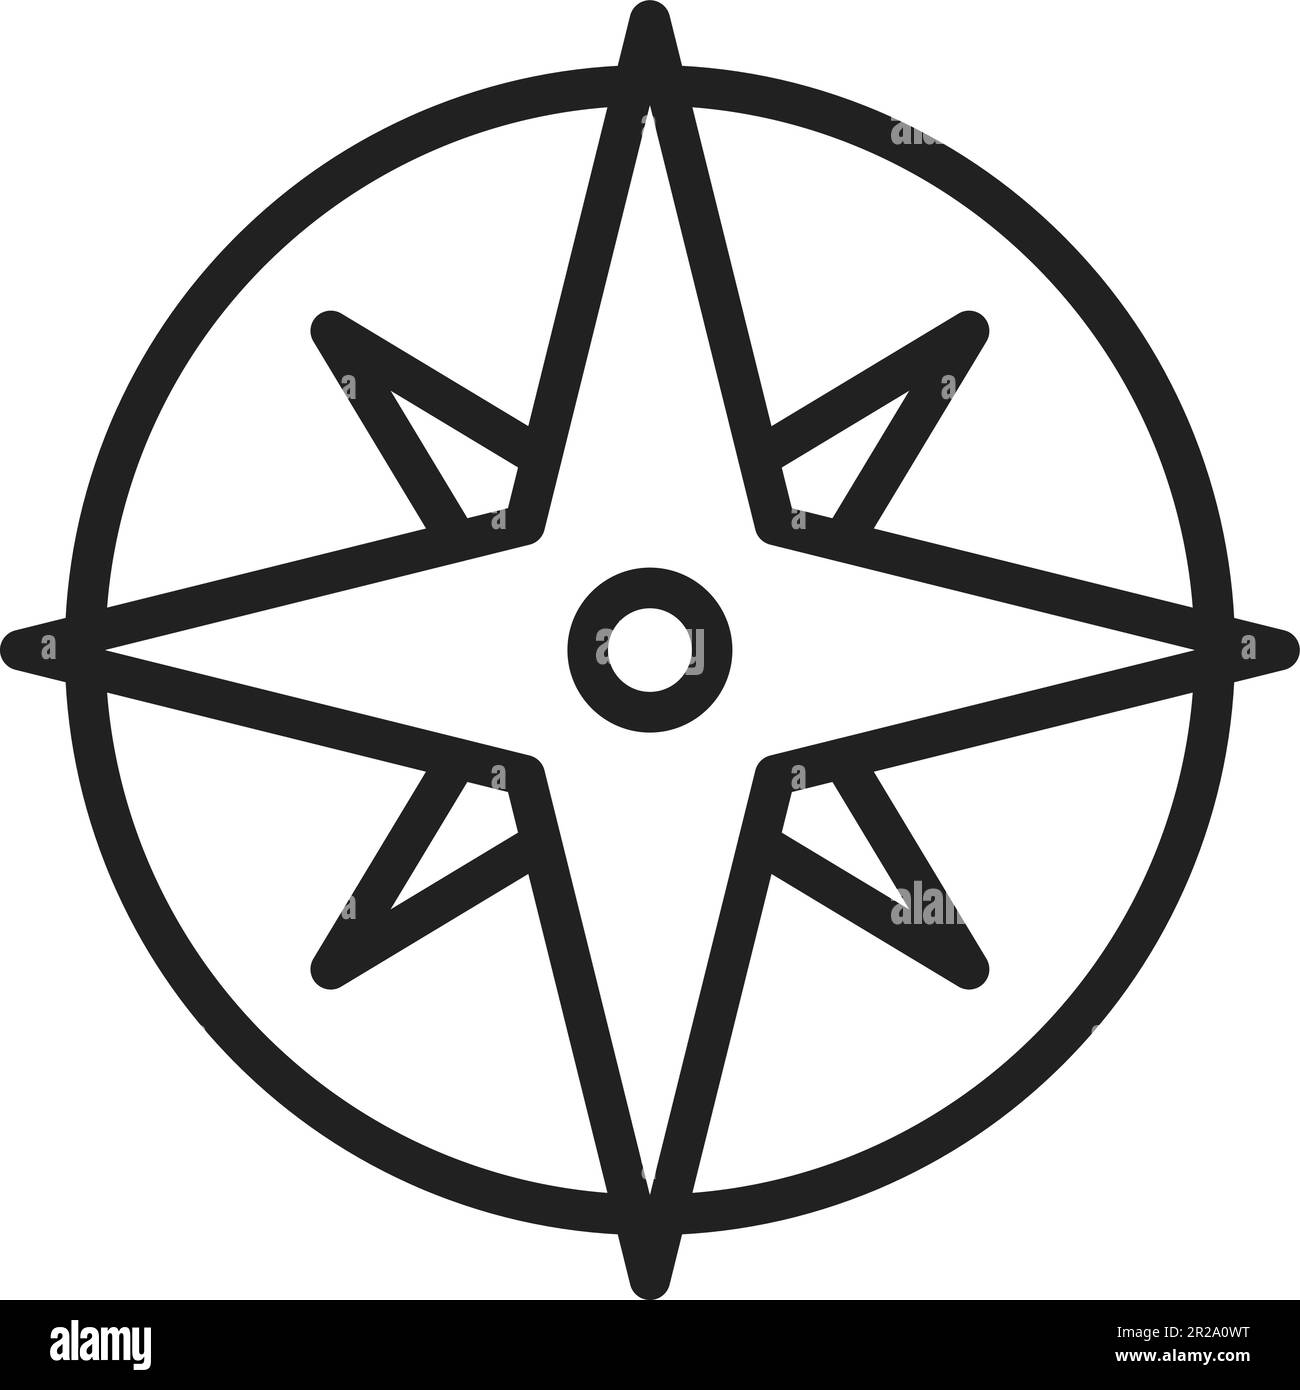 Premium Vector  A blue compass with a white center and a black circle on  the bottom.